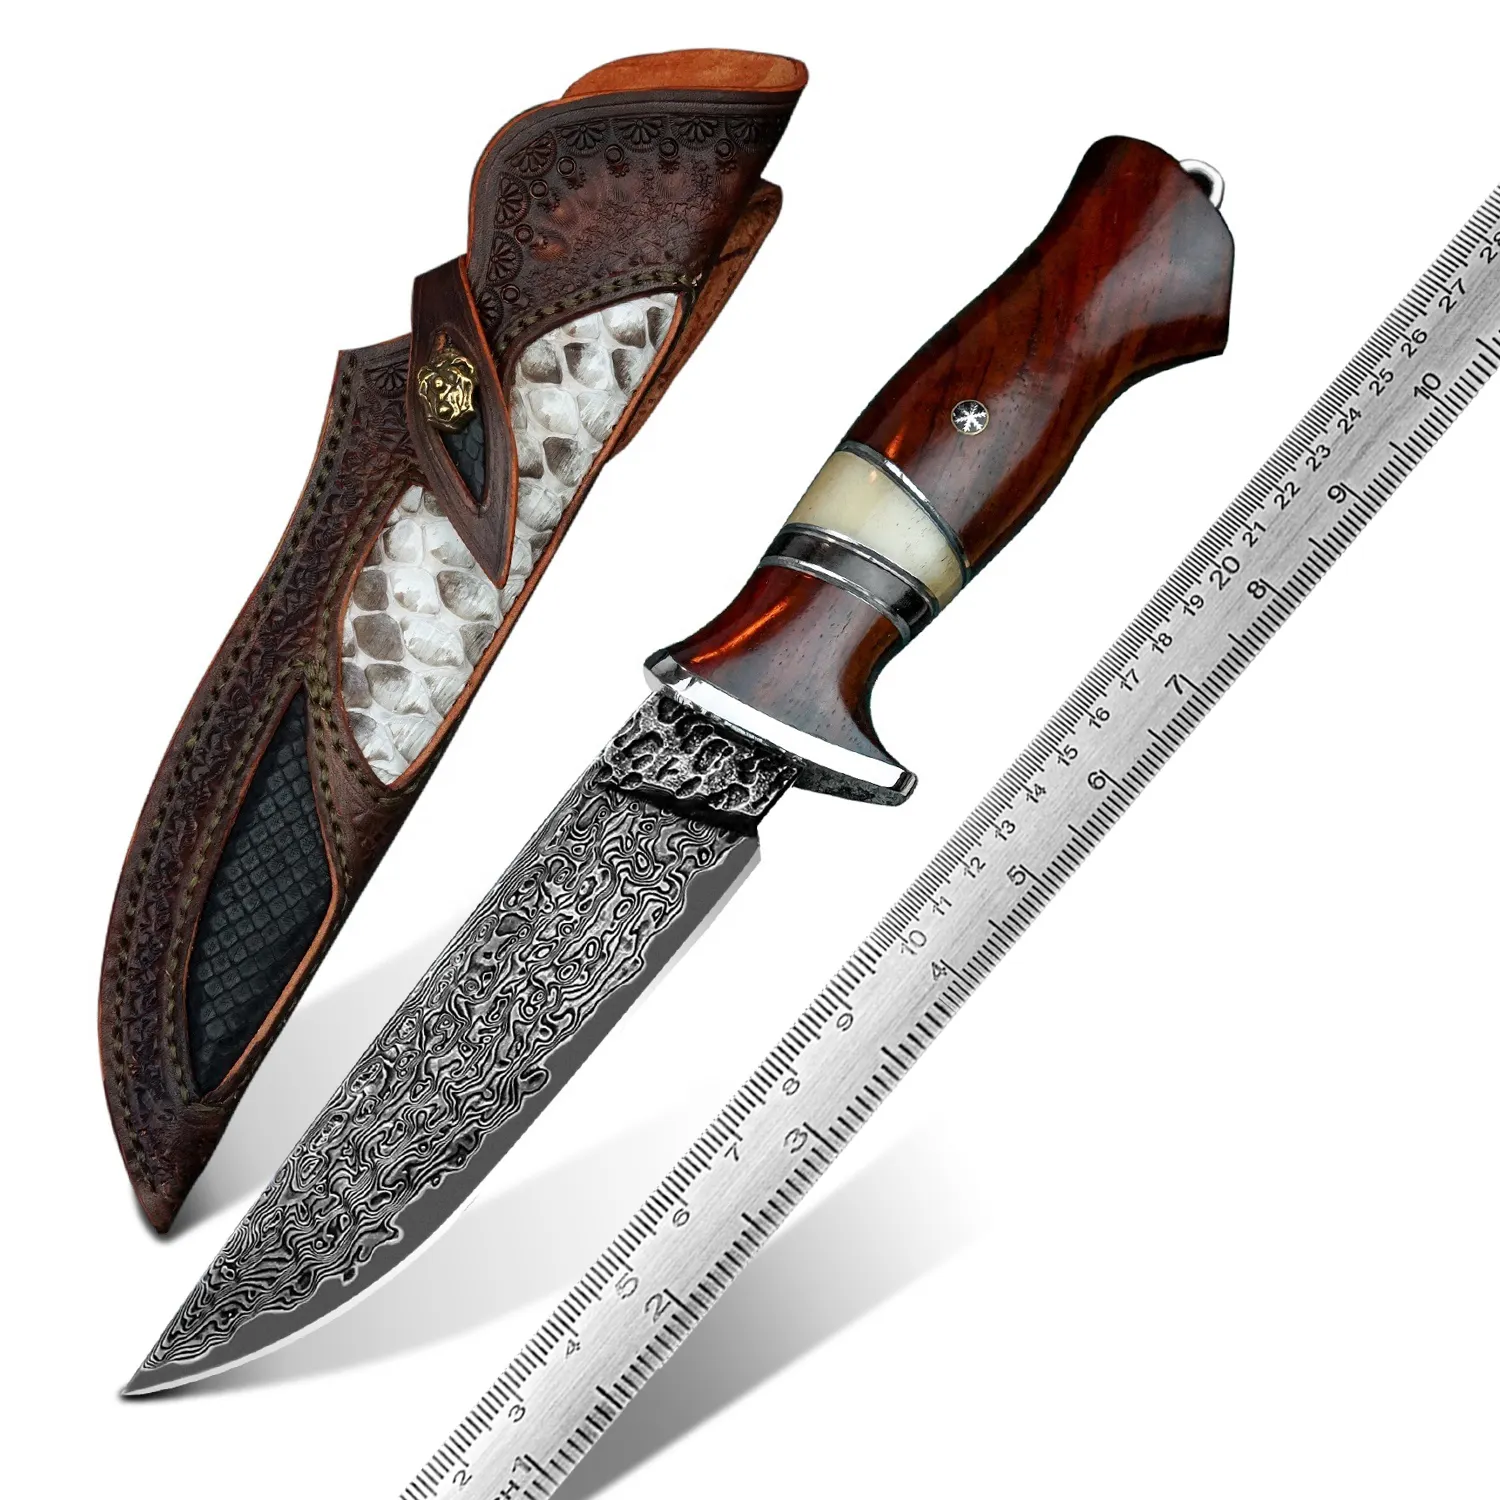 Full Tang Outdoor Survival Hunting Knives Custom Hand Forged VG10 Steel Damascus Bowie Knife